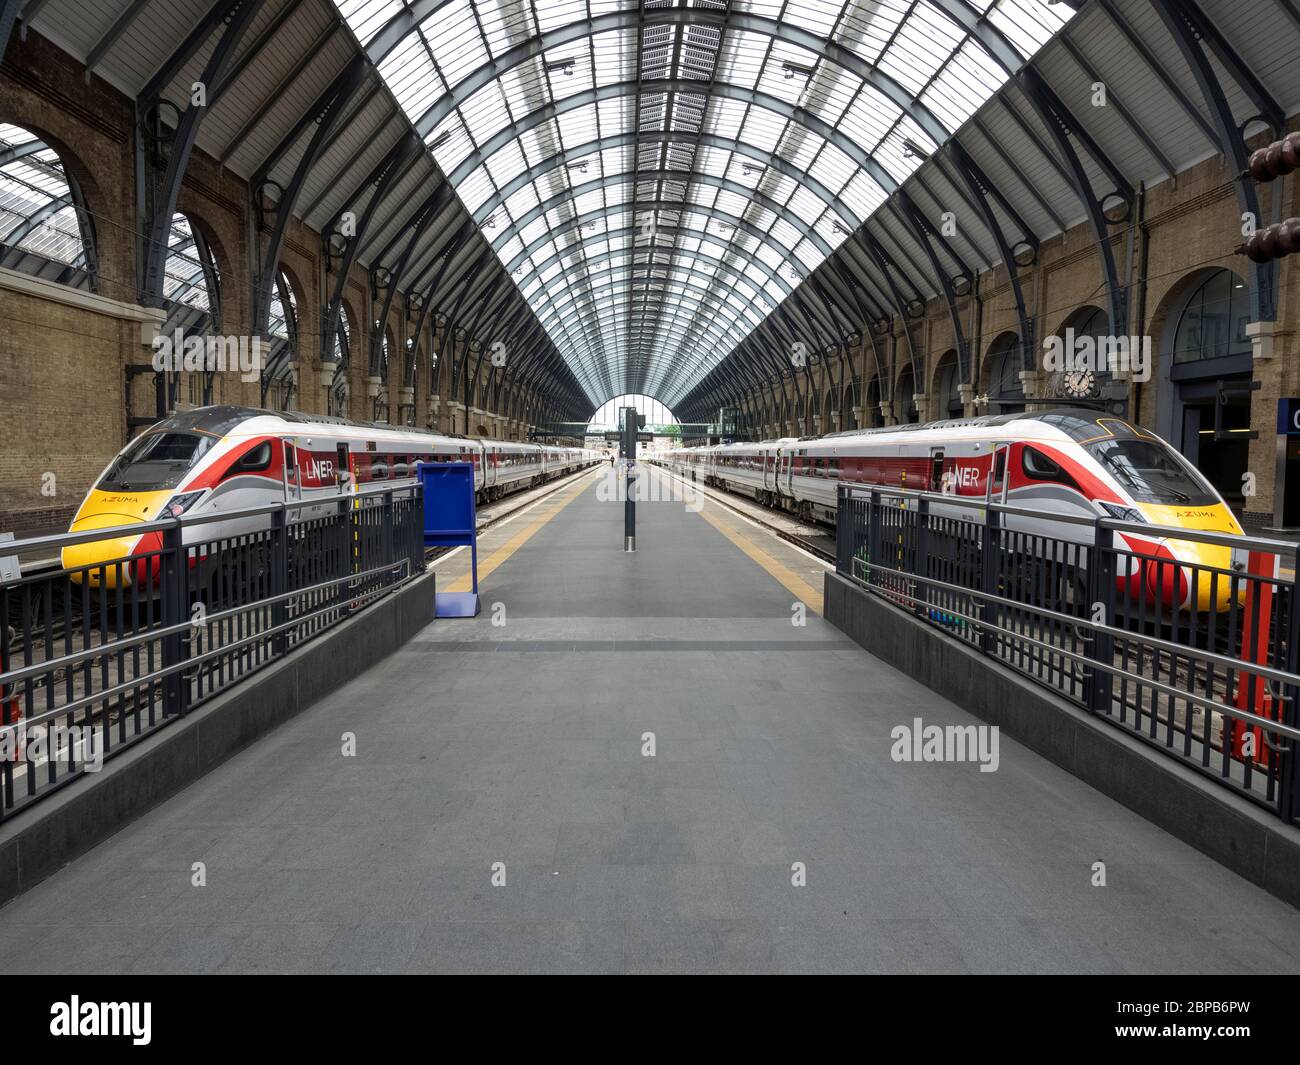 London. UK. May the 17th 2020 at lunch time. Wide view angle of empty platforms at King’s Cross Railway Station. Stock Photo